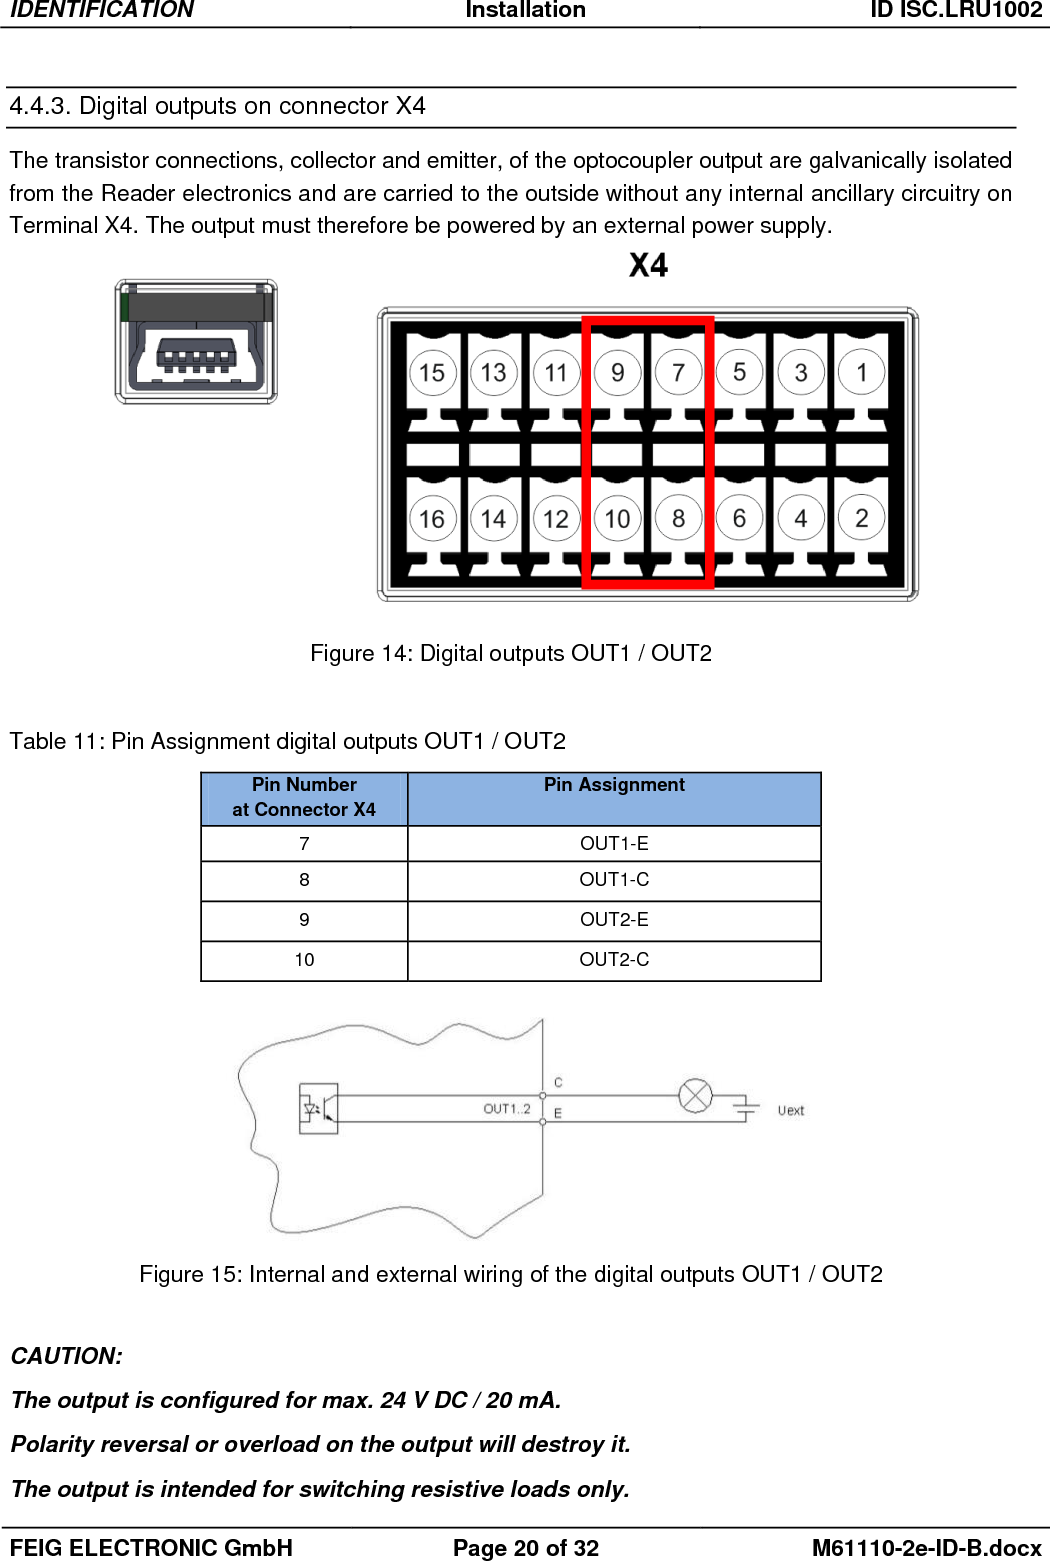 IDENTIFICATION Installation ID ISC.LRU1002  FEIG ELECTRONIC GmbH Page 20 of 32 M61110-2e-ID-B.docx  4.4.3. Digital outputs on connector X4 The transistor connections, collector and emitter, of the optocoupler output are galvanically isolated from the Reader electronics and are carried to the outside without any internal ancillary circuitry on Terminal X4. The output must therefore be powered by an external power supply.    Figure 14: Digital outputs OUT1 / OUT2  Table 11: Pin Assignment digital outputs OUT1 / OUT2    Figure 15: Internal and external wiring of the digital outputs OUT1 / OUT2  CAUTION: The output is configured for max. 24 V DC / 20 mA. Polarity reversal or overload on the output will destroy it. The output is intended for switching resistive loads only. Pin Number  at Connector X4 Pin Assignment 7 OUT1-E 8 OUT1-C 9 OUT2-E 10 OUT2-C 